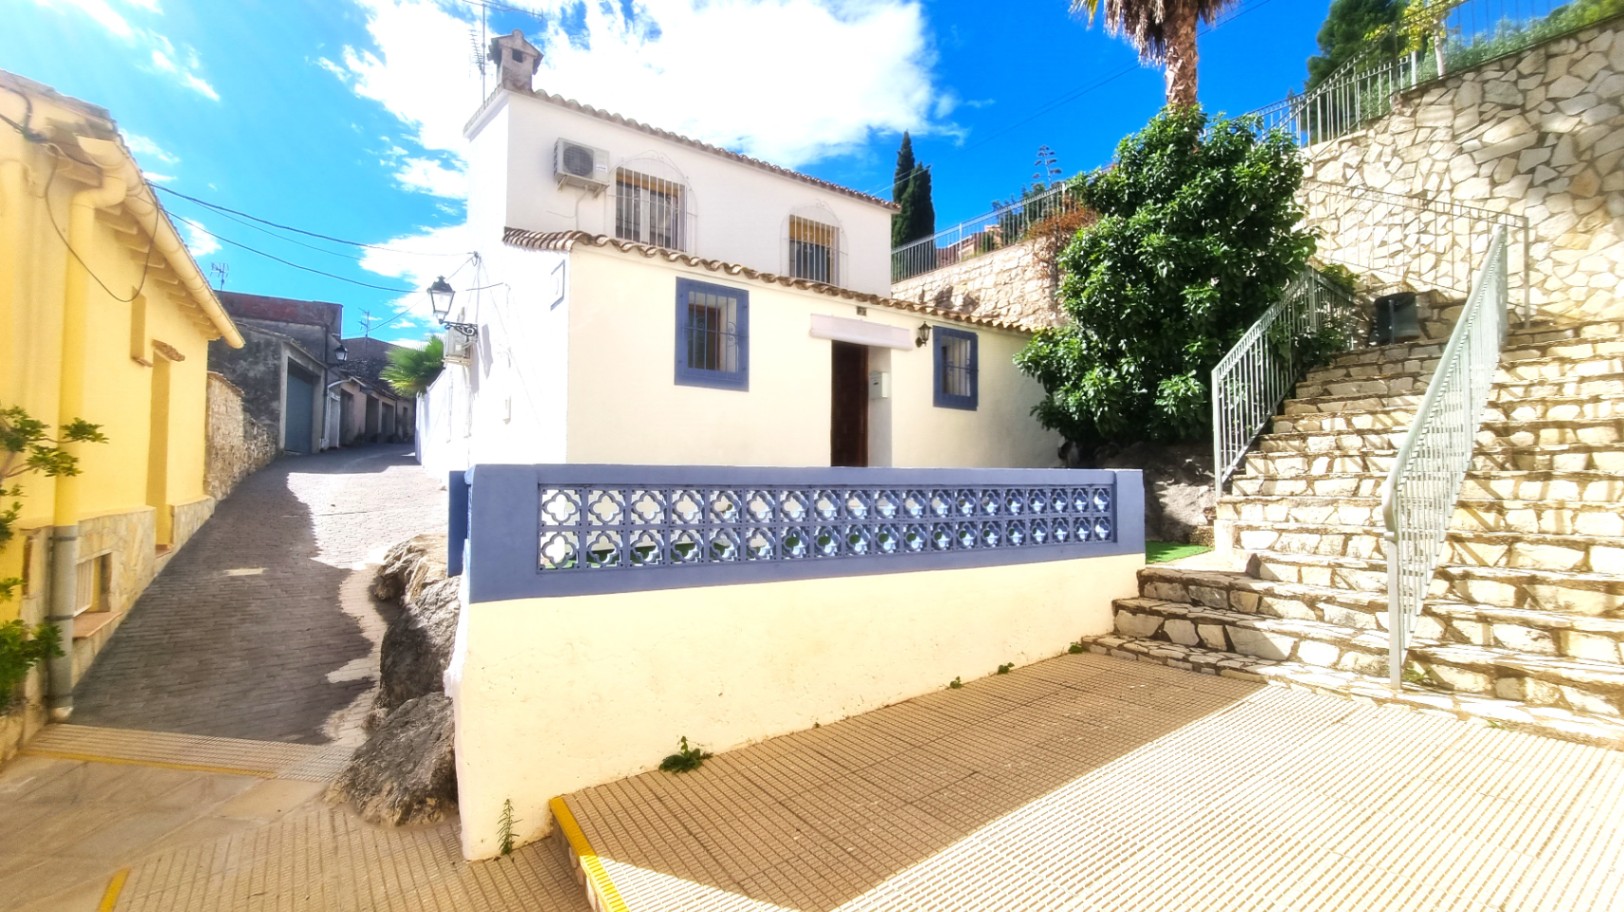 House for sale in Sagra